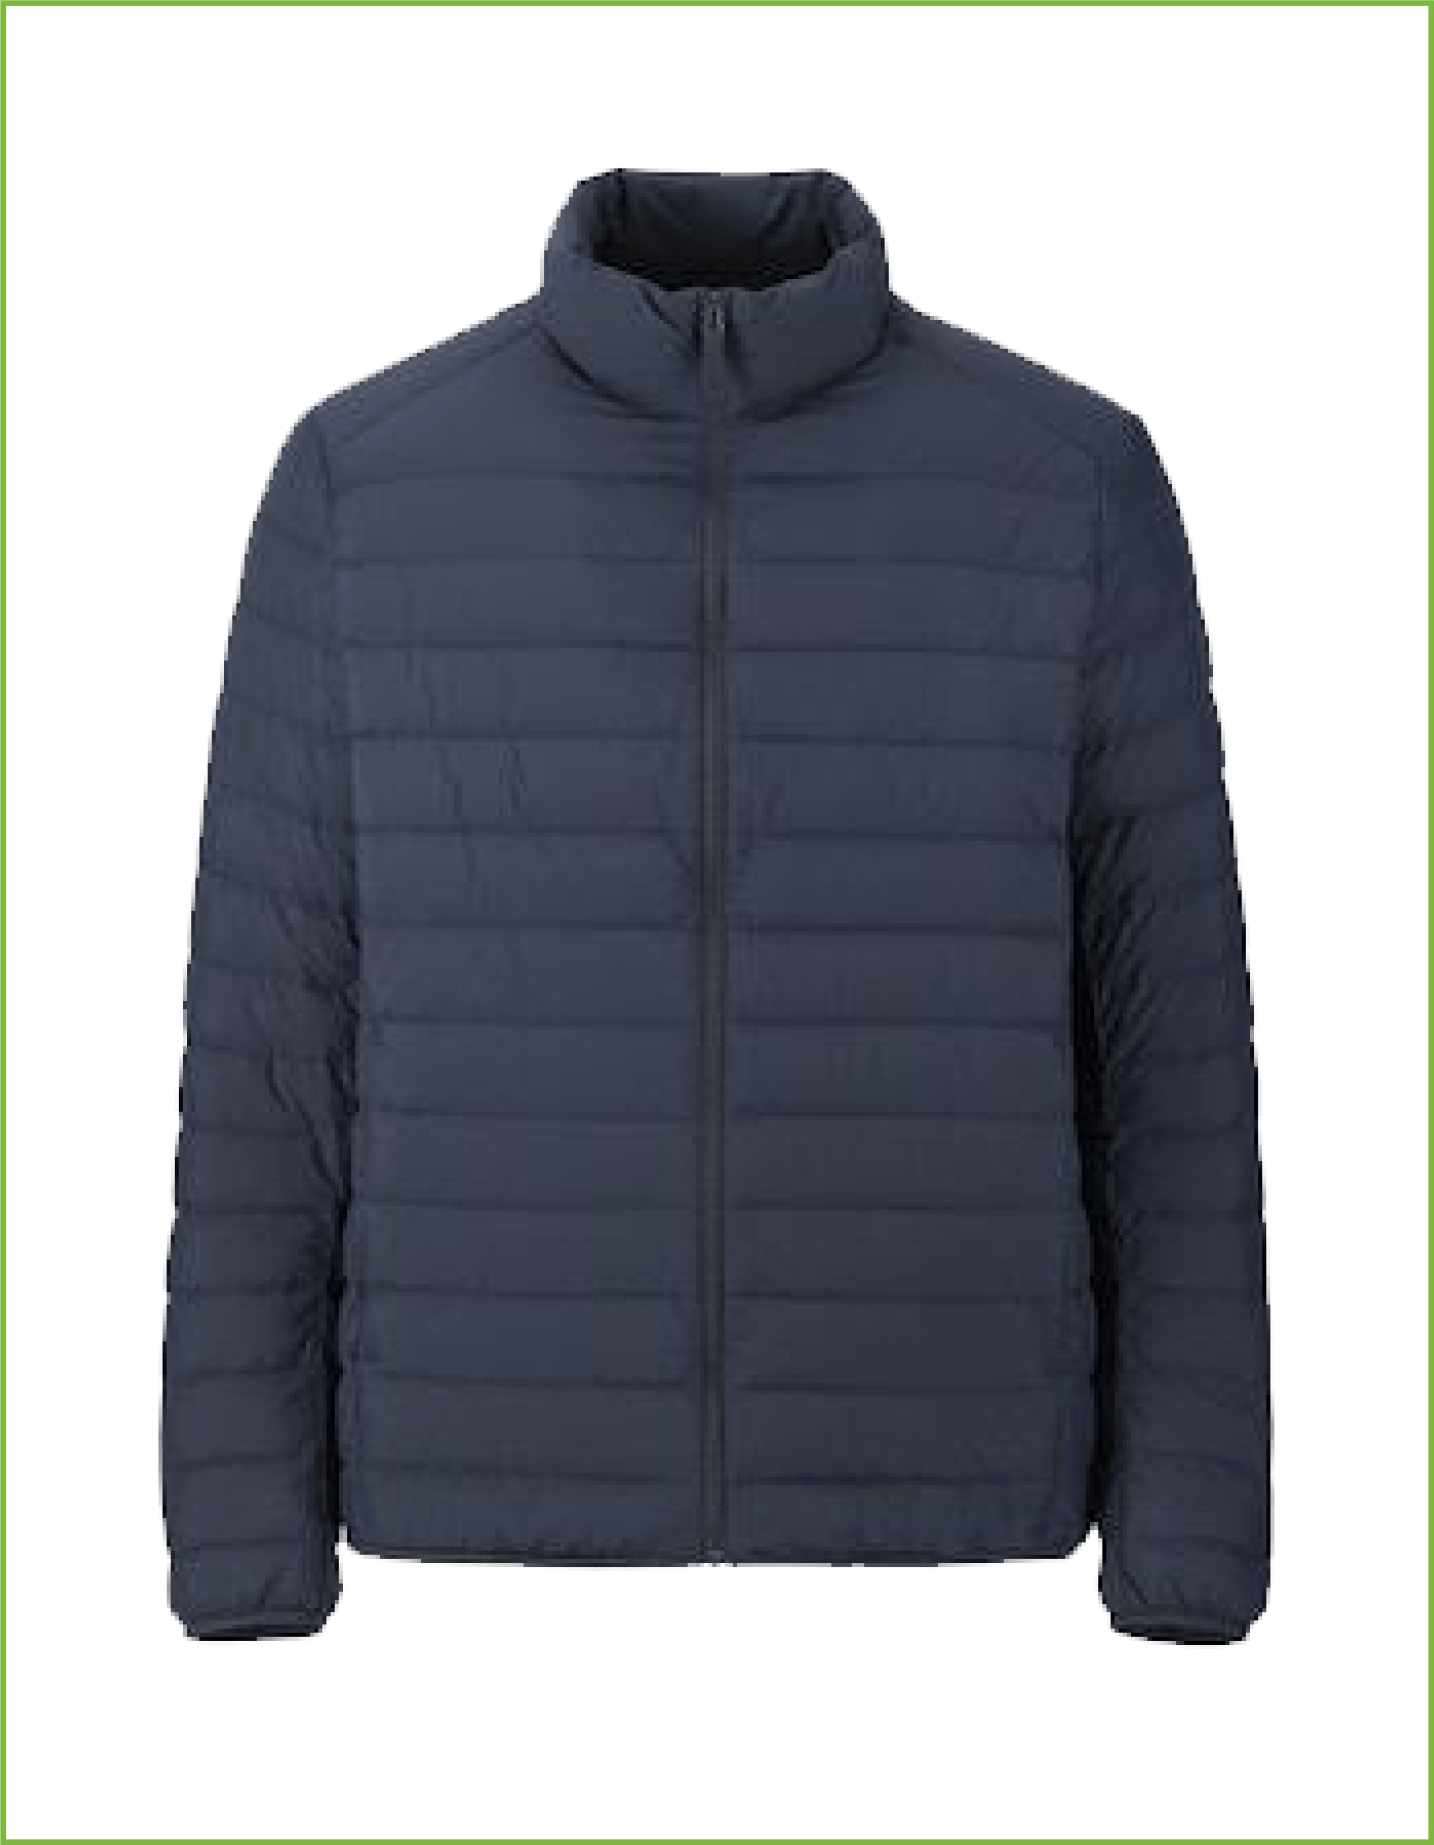 Padded Jacket | Connection Group L.L.C